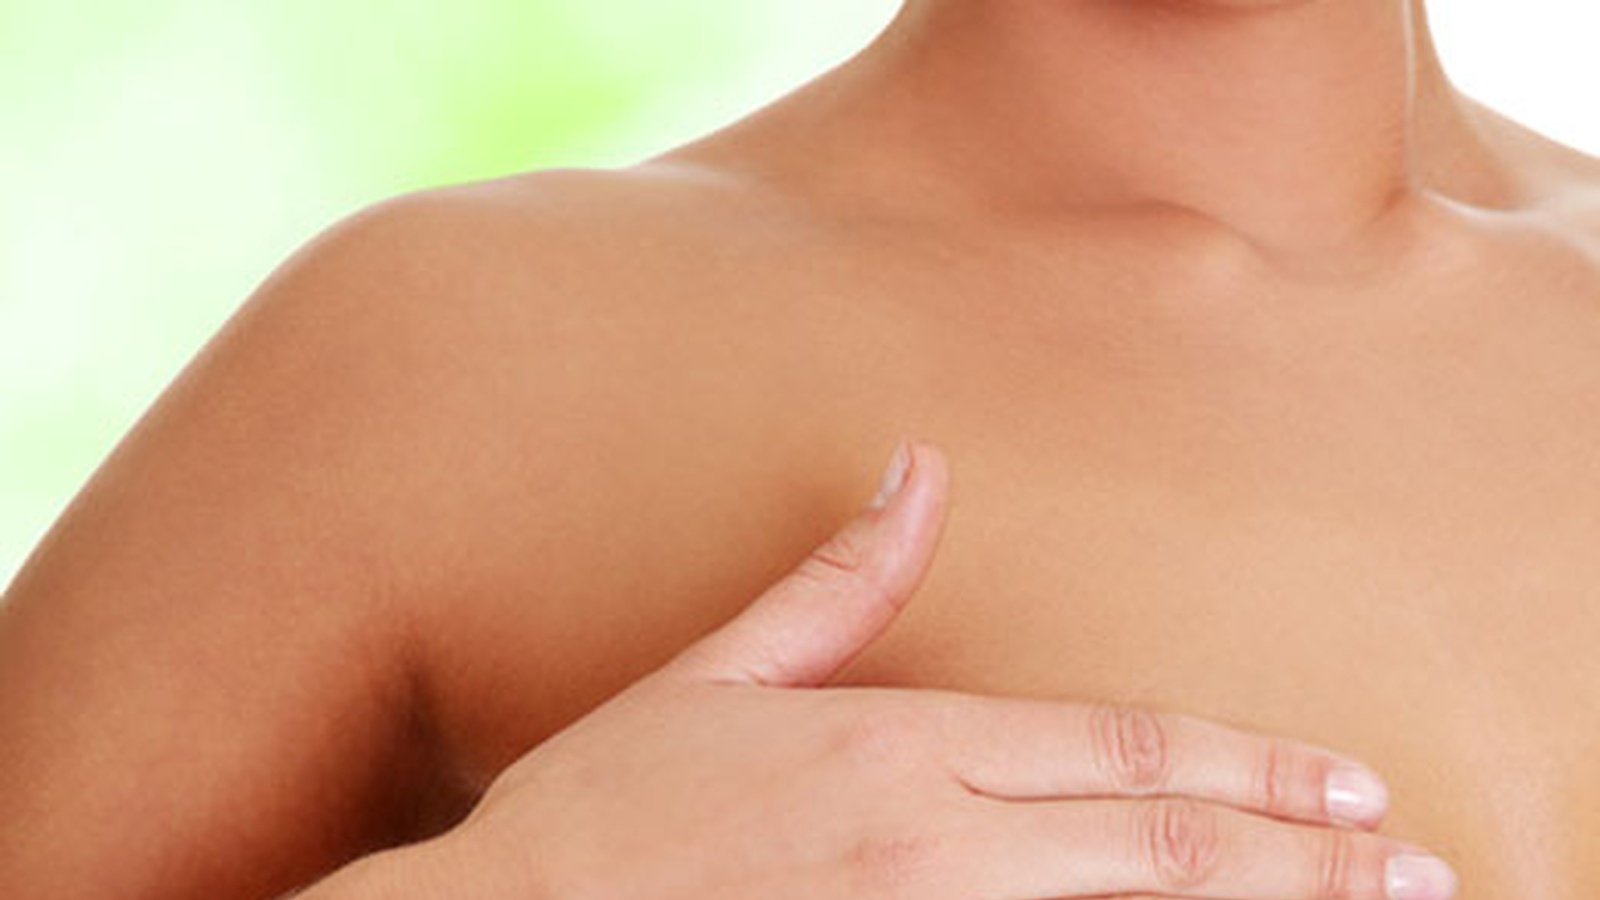 17 Chemicals To Avoid To Lower Risk Of Breast Cancer